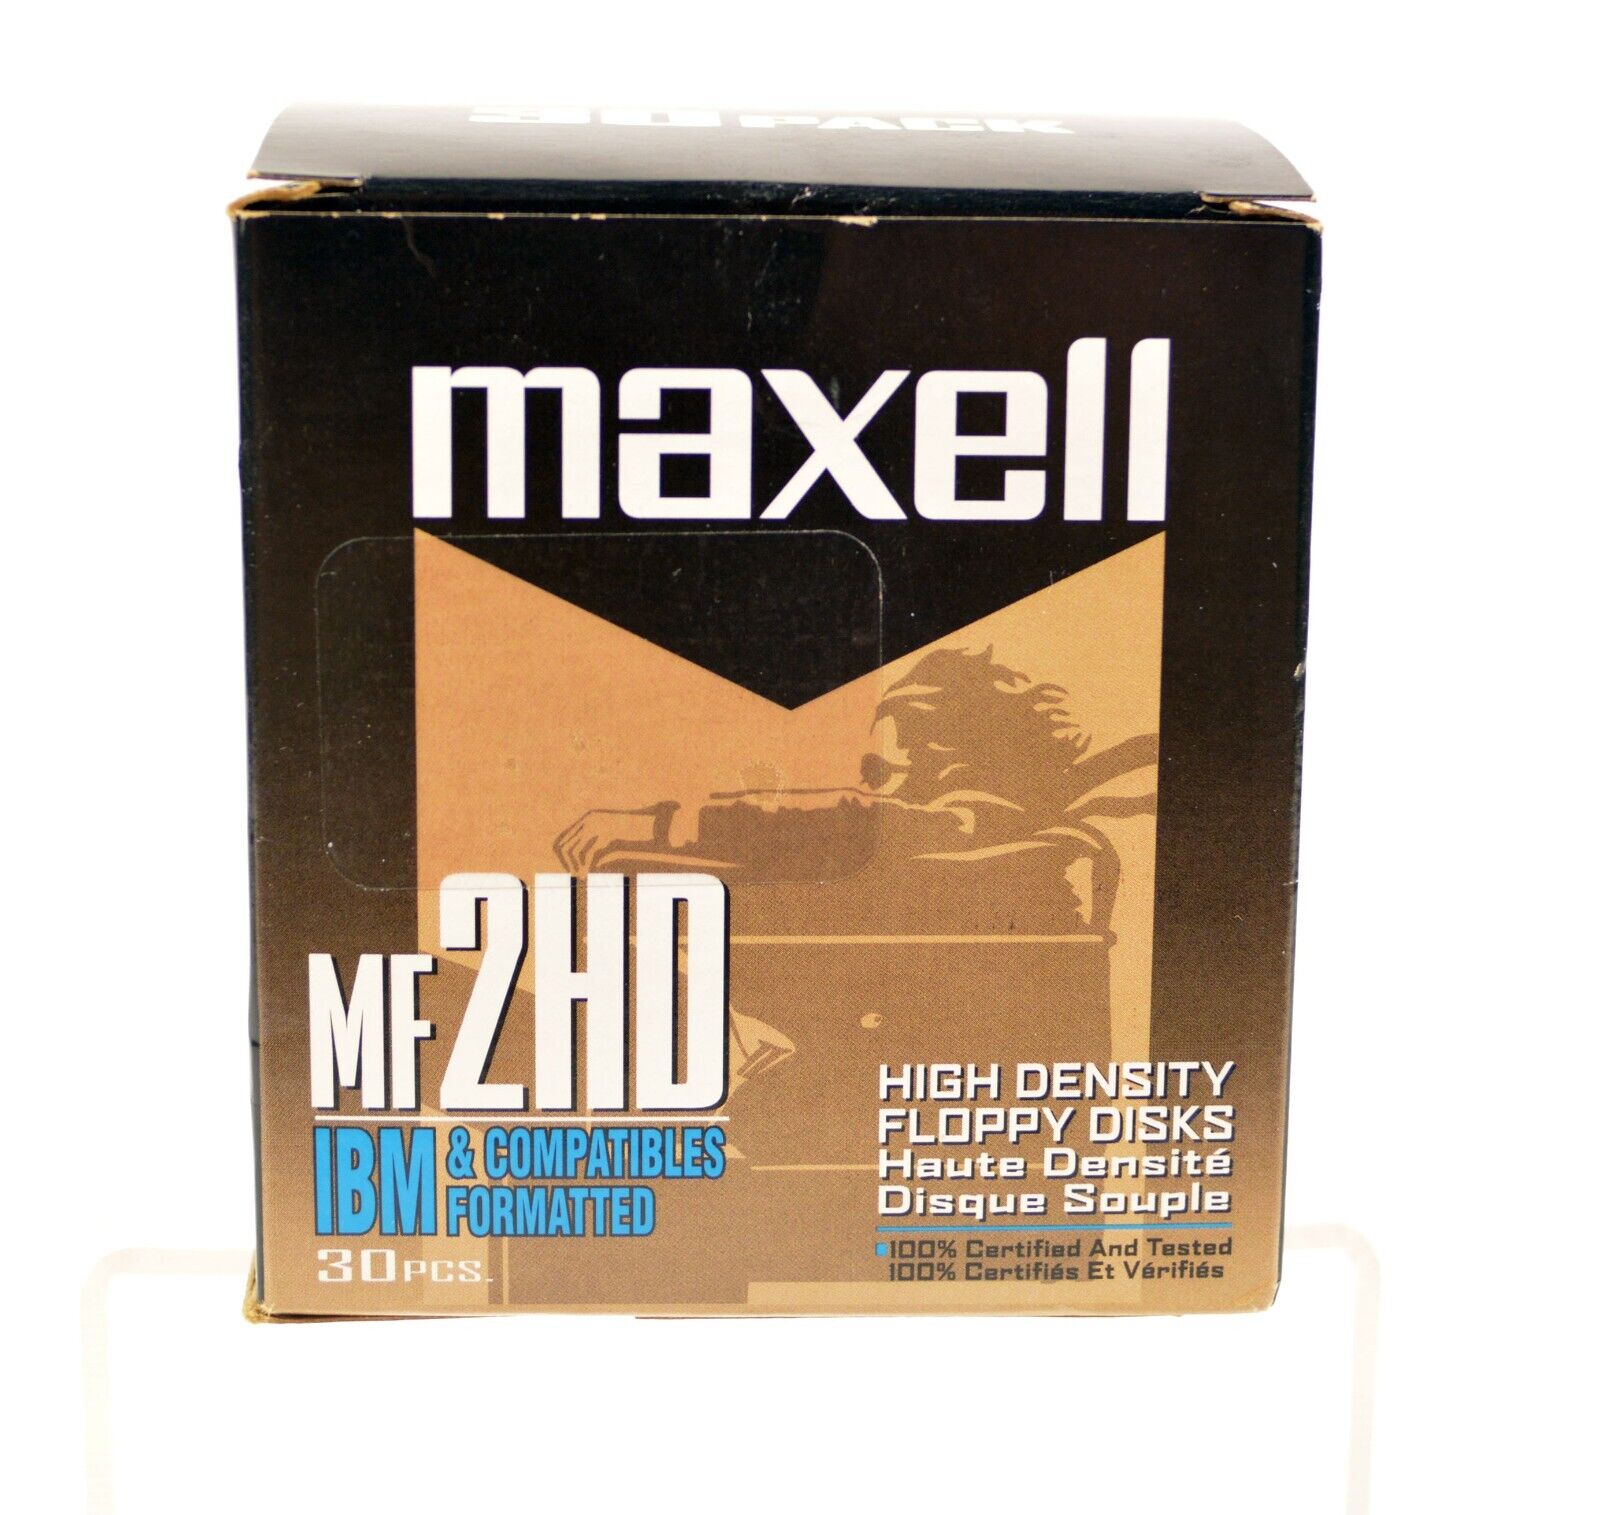 Maxell MD 2HD 3.5 High Density Formatted Floppy Disks - Pack of 30 New